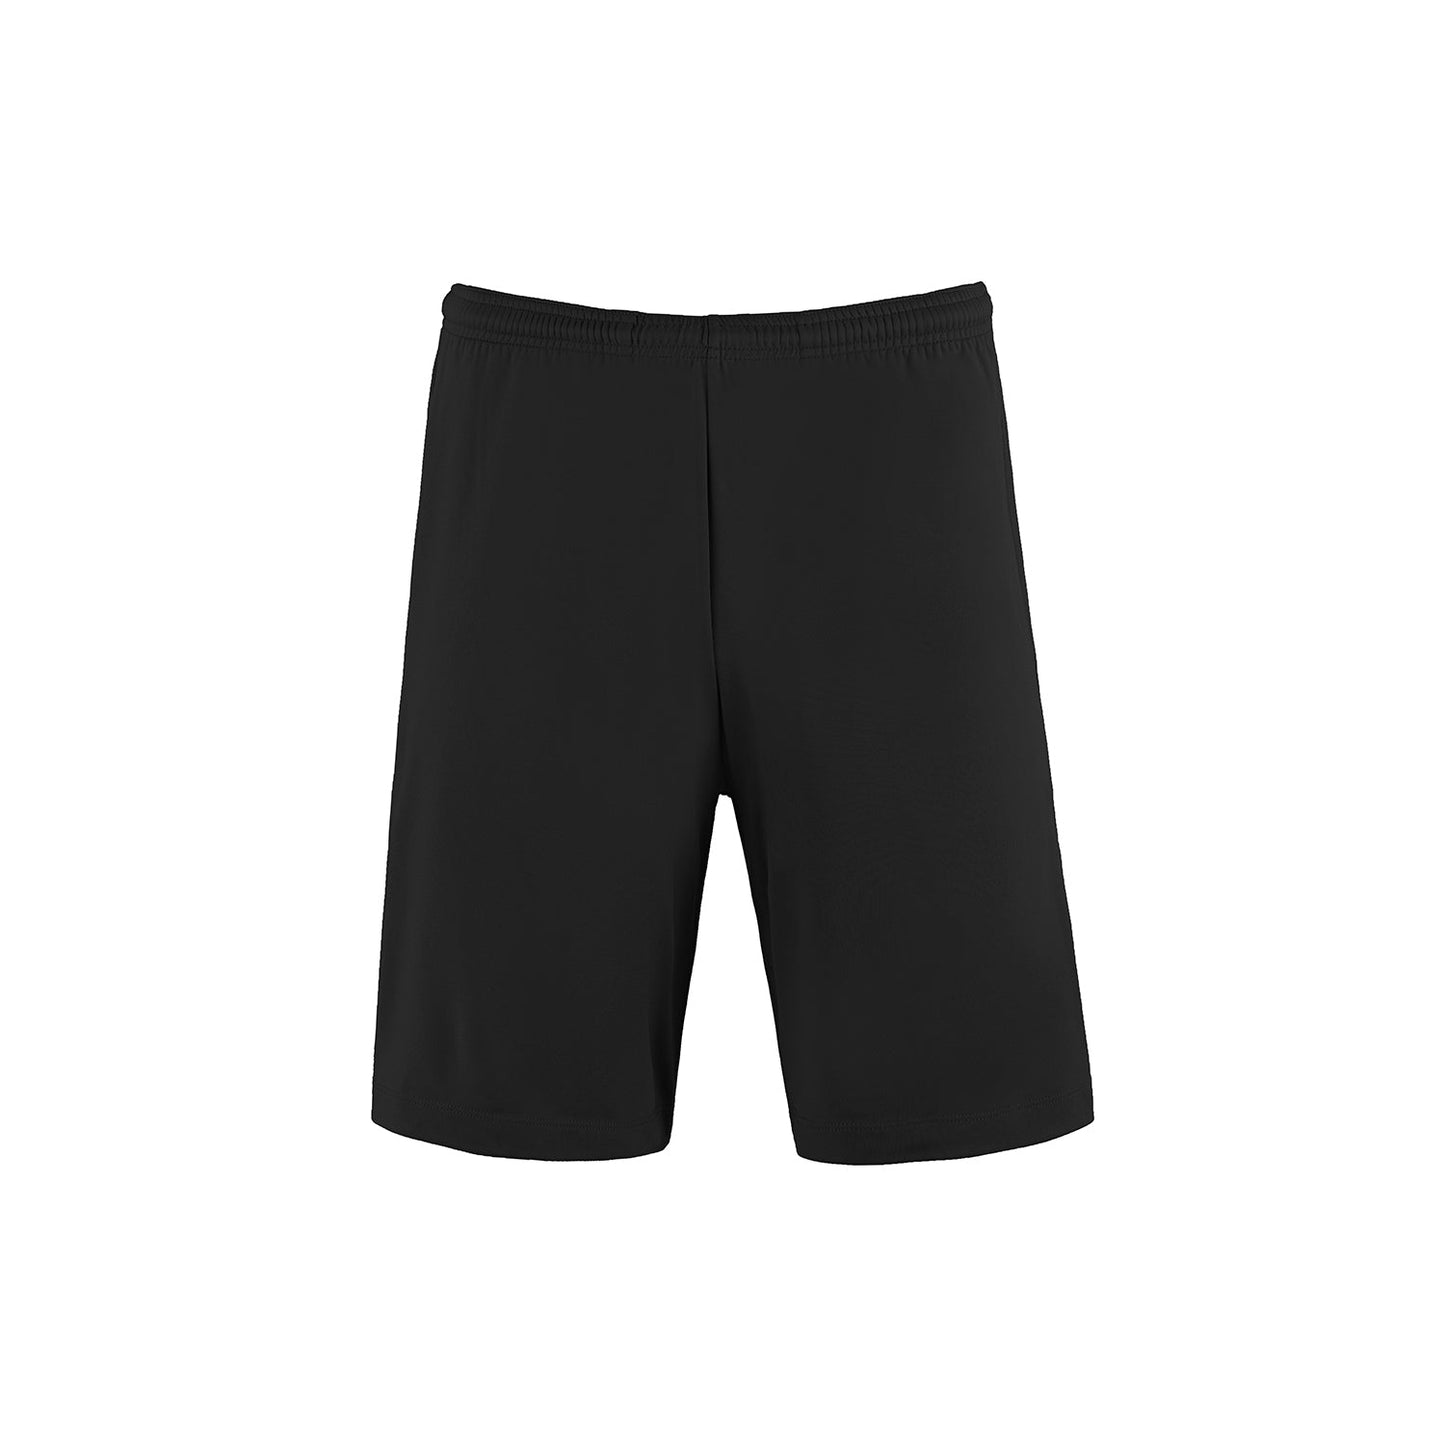 P4475Y - Wave - Youth Athletic Short with Pockets - Black